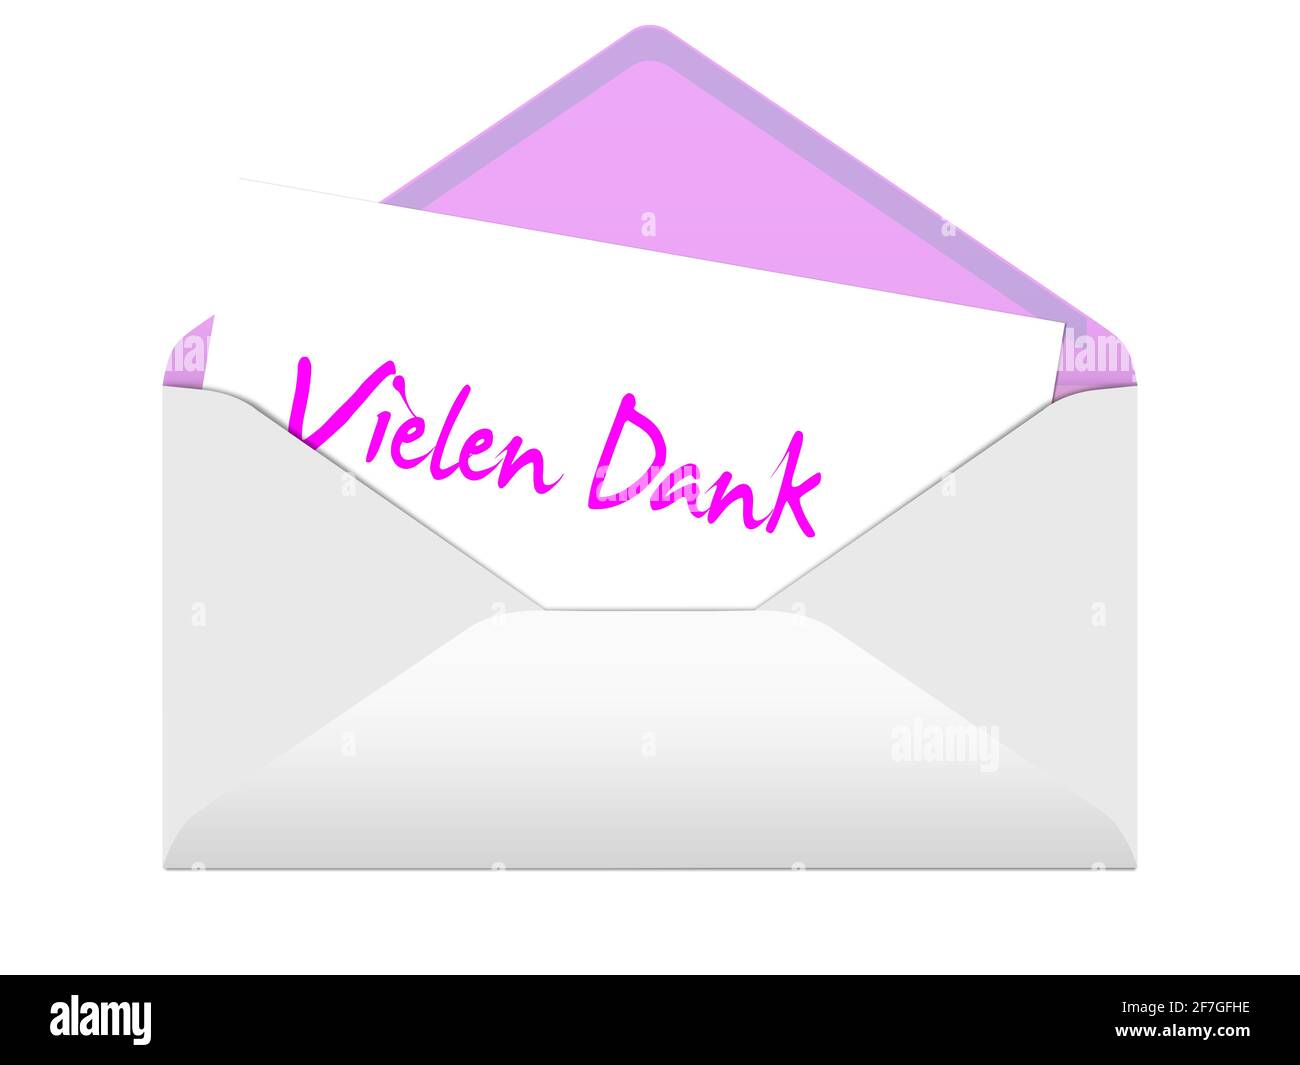 Envelope and card with the text 'Vielen Dank', translation 'Thank you', 3D illustration Stock Photo